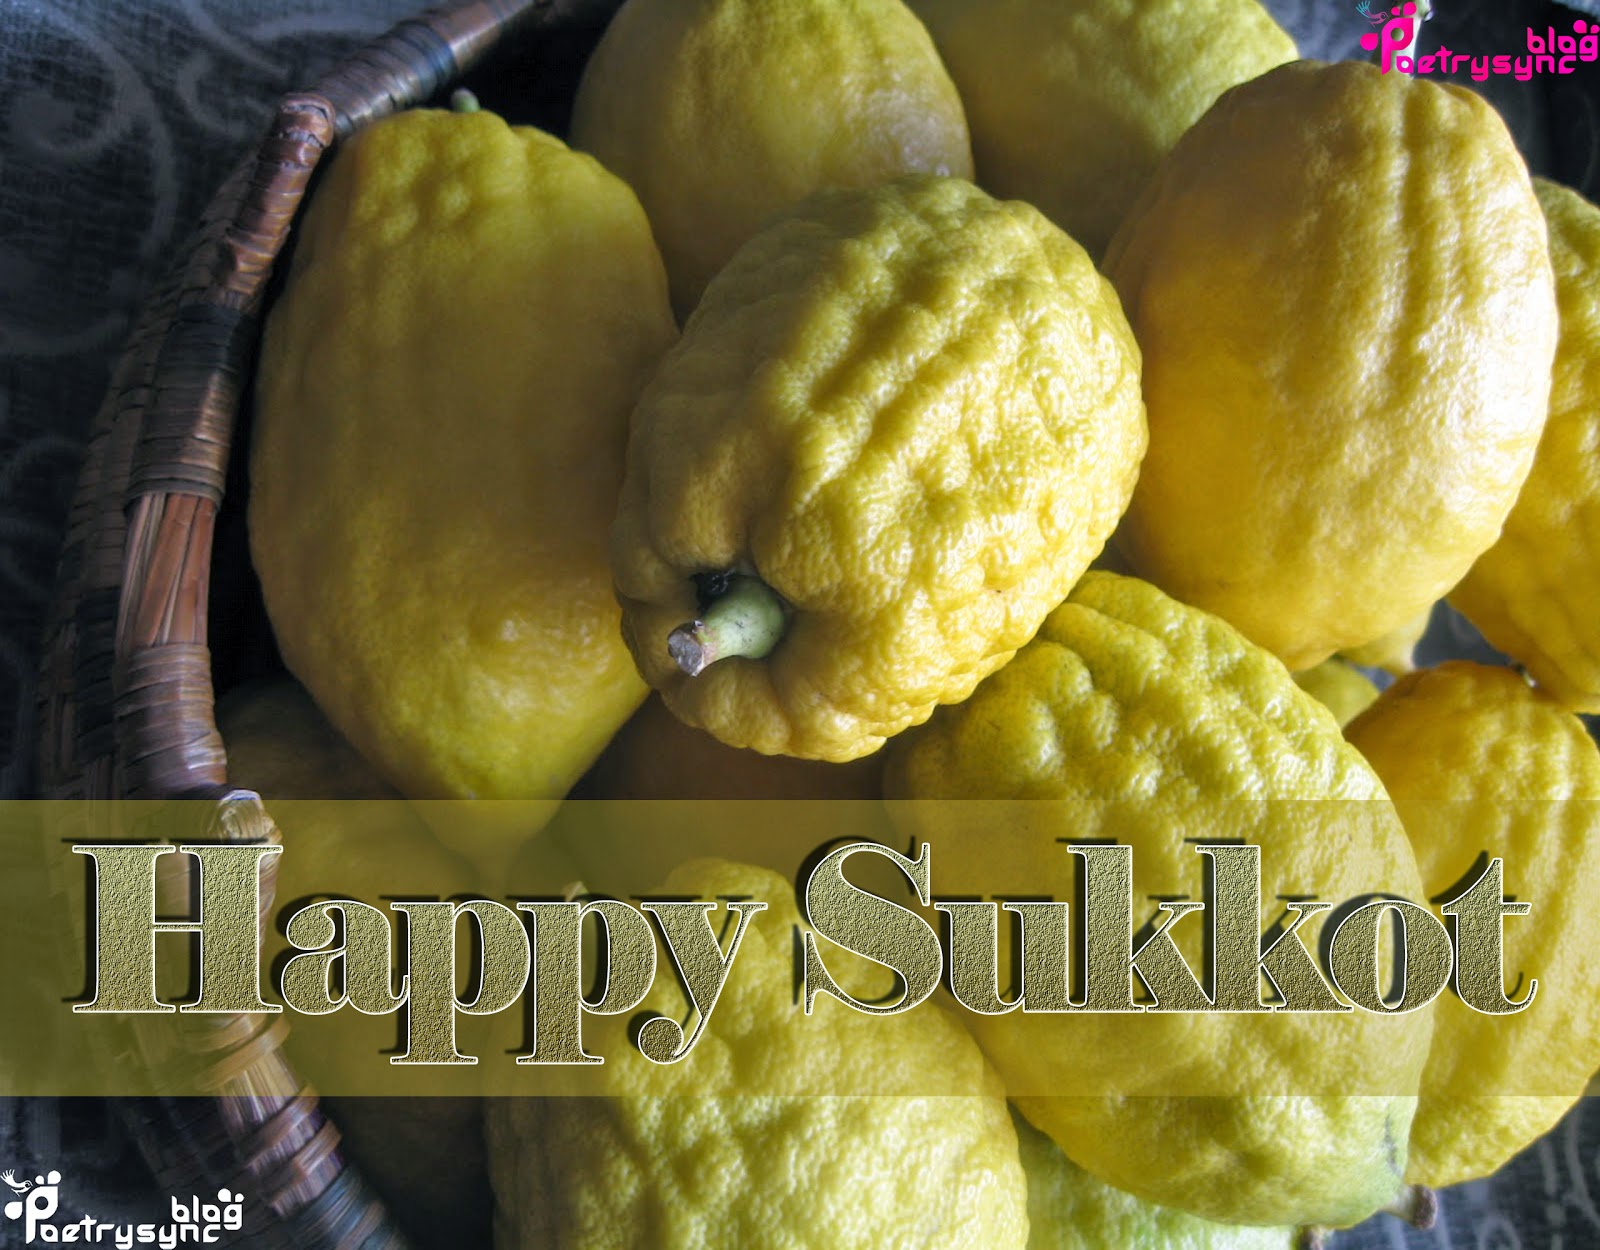 Wishing Sukkot Festival Greetings With Detail Information And